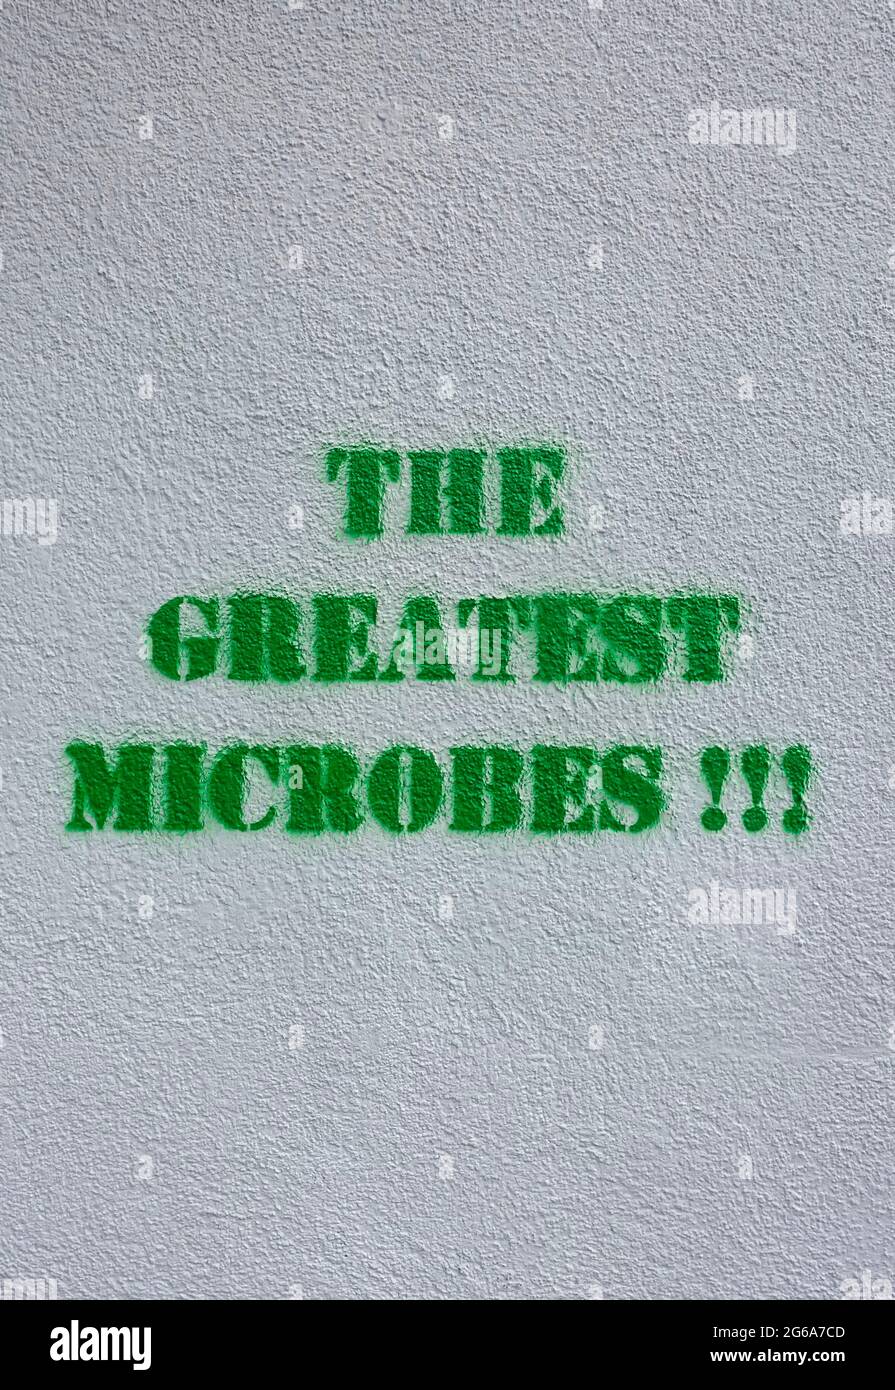 Stencil, the greatest microbes, Berlin, Germany Stock Photo